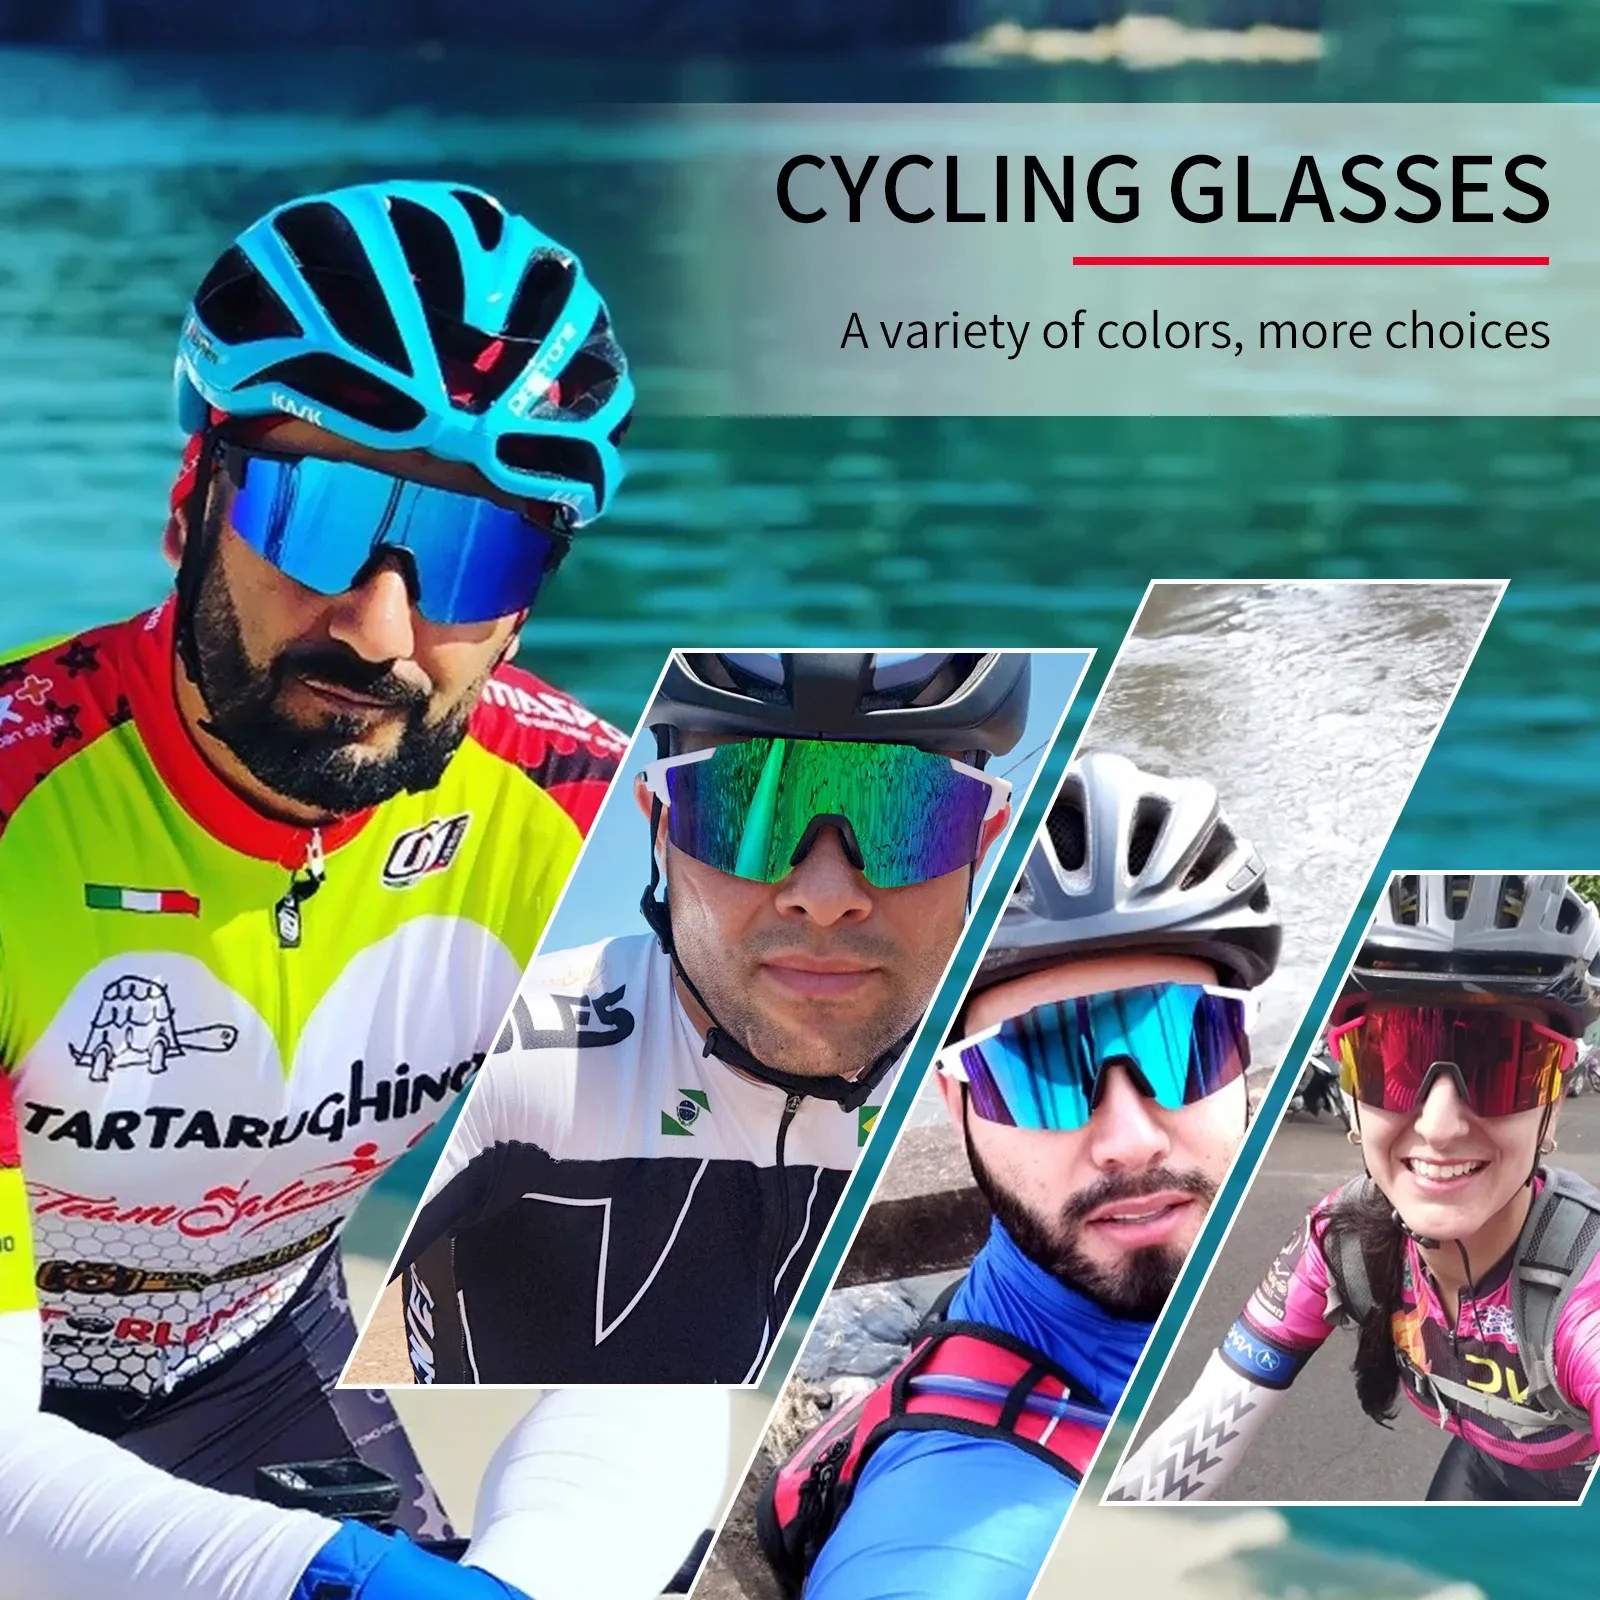 Cycling Sunglasses For Men And Women Riding, Running, Running Goggles, With  Stylish Design And Protective Lenses From Shu09, $17.36